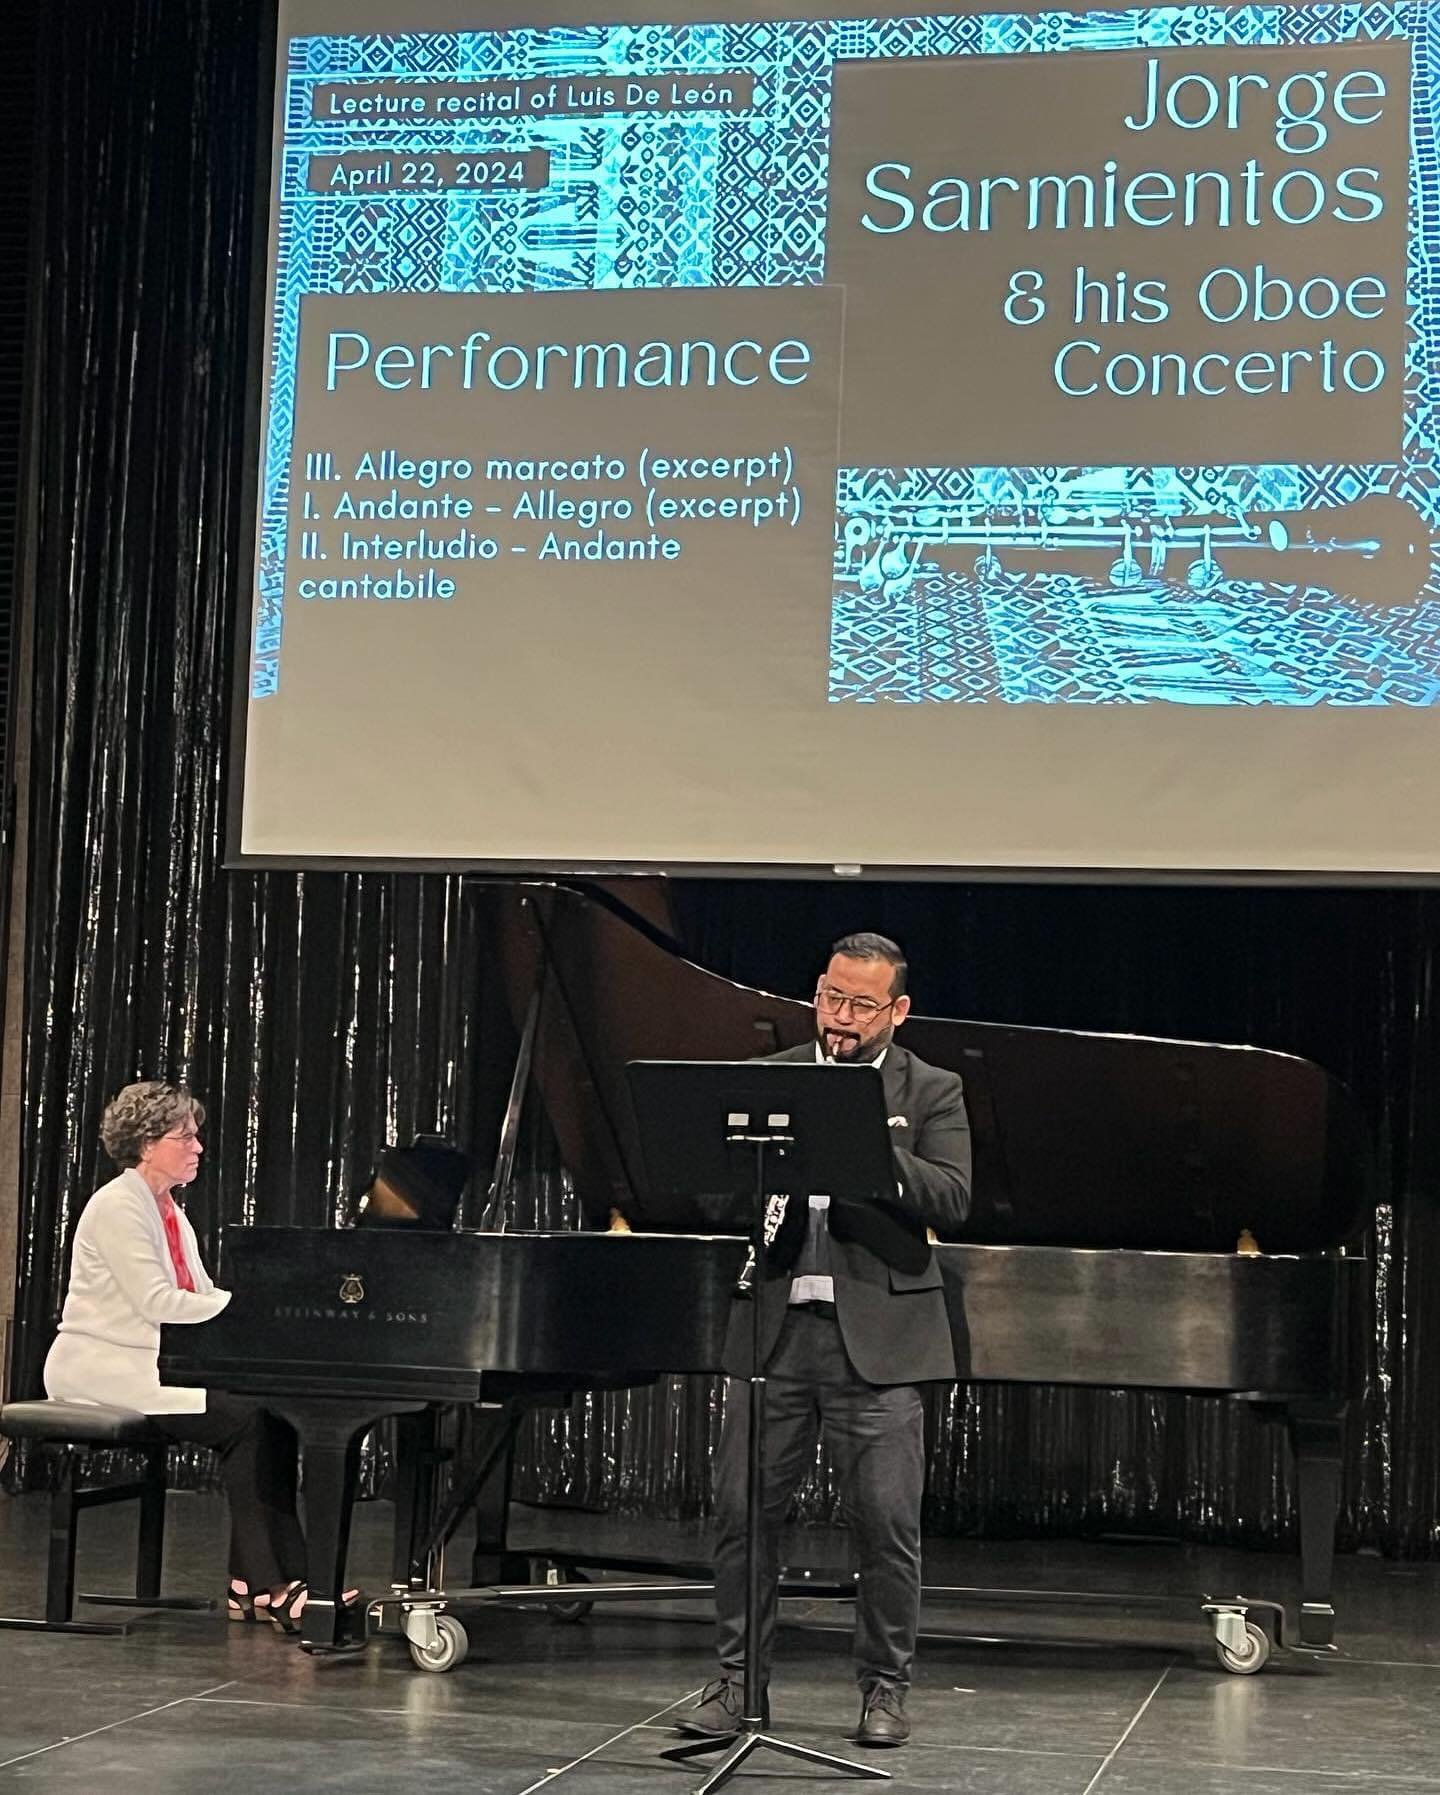 This Monday April 22nd Schwoboe graduate student Luis De Leon presented a very interesting lecture recital about Jorge Sarmientos oboe concerto, with collaboration of our amazing pianist Susan Hoskins and Schwob composition student Evan O&rsquo;Dell.